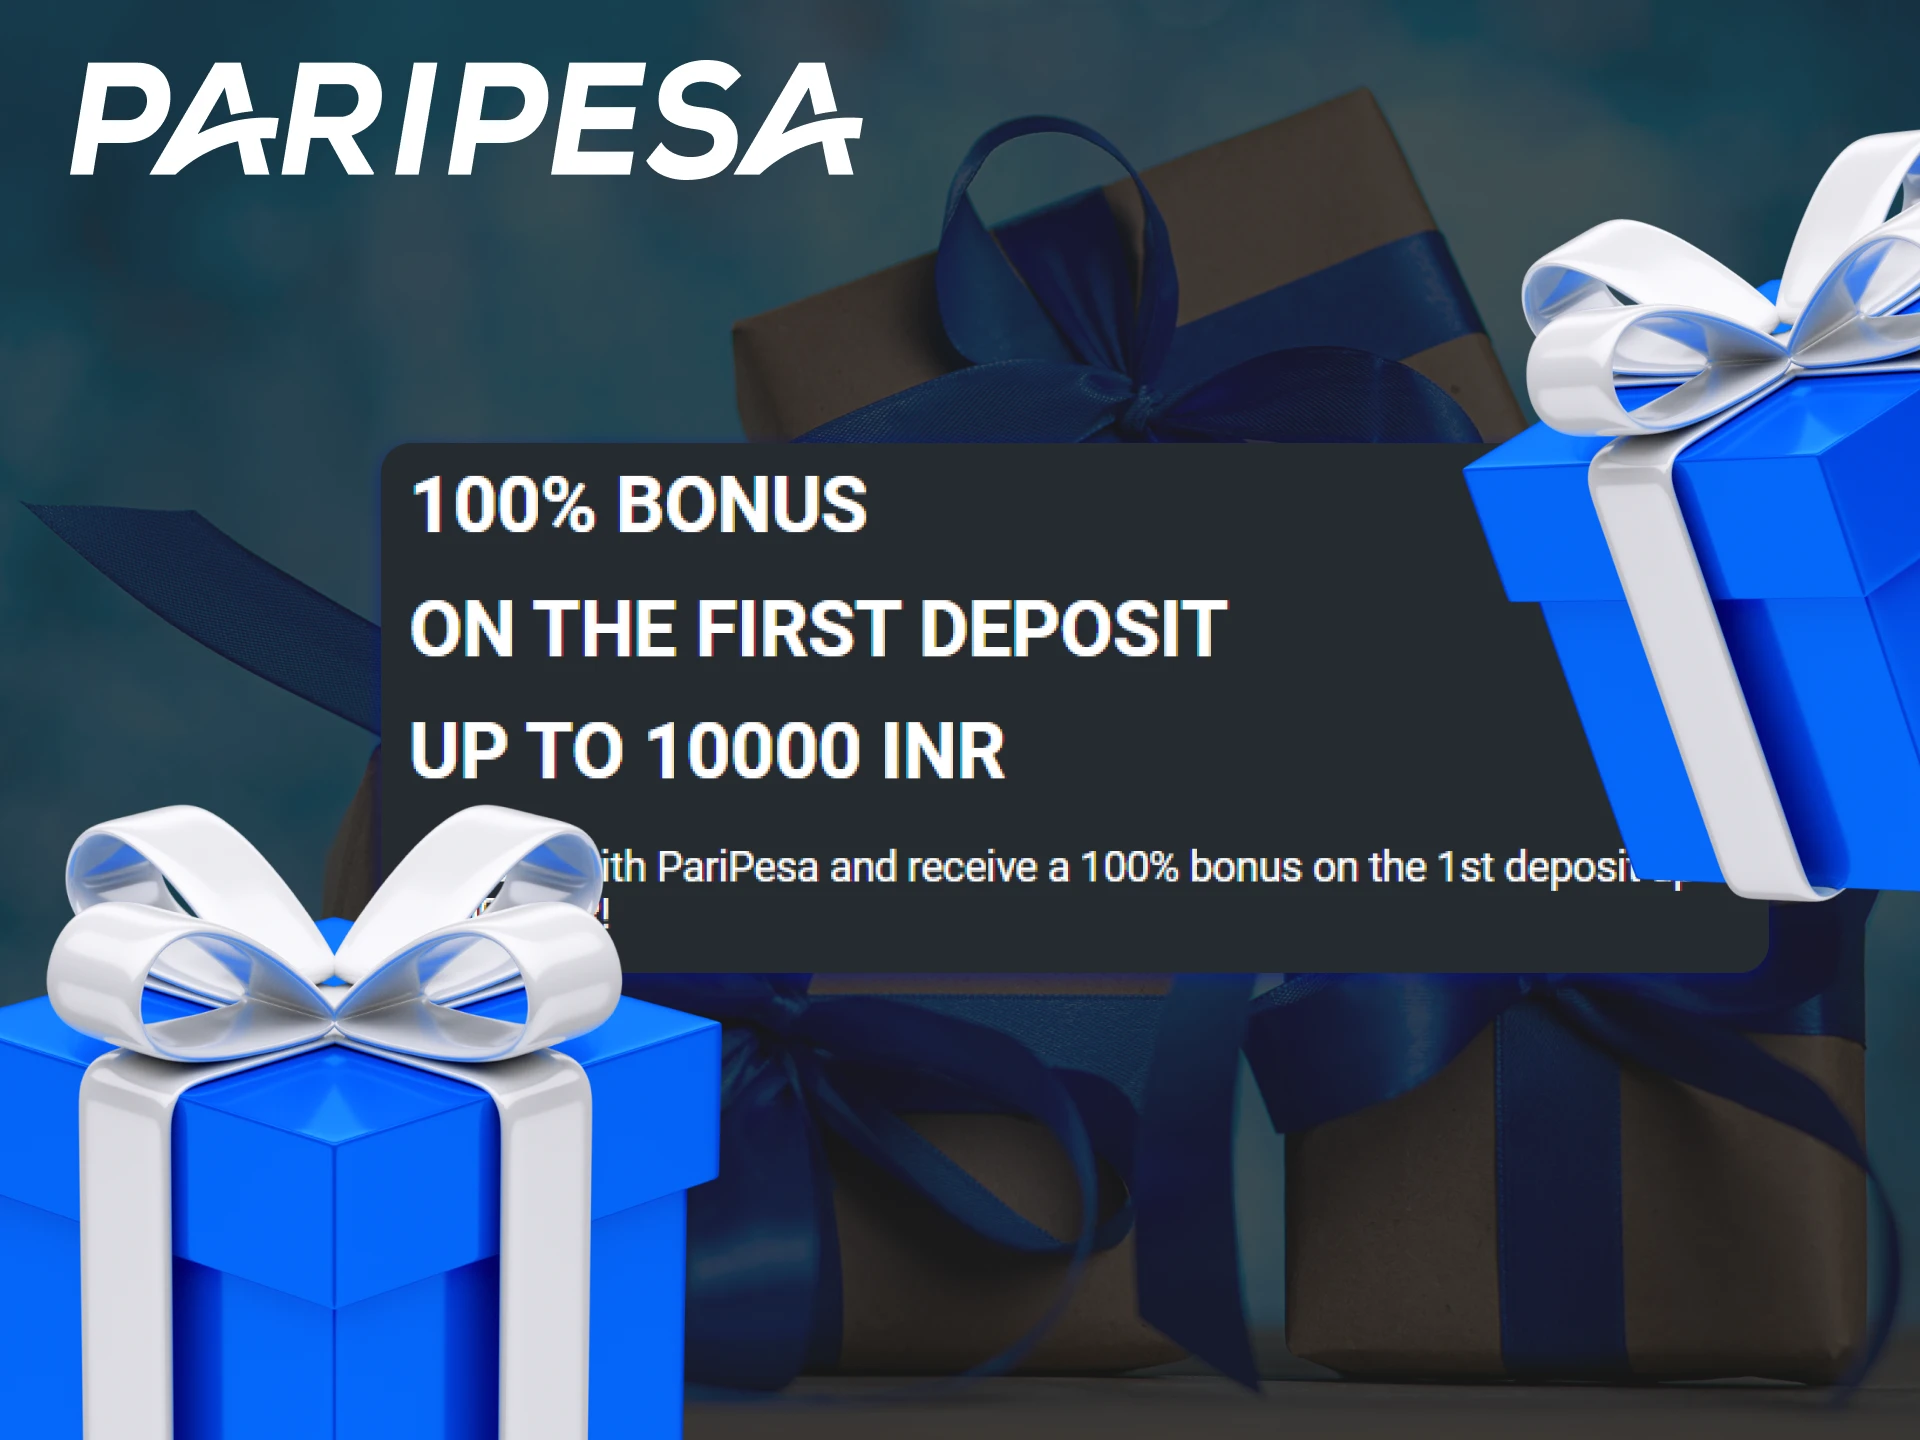 You can receive the Paripesa welcome bonus after your first deposit.